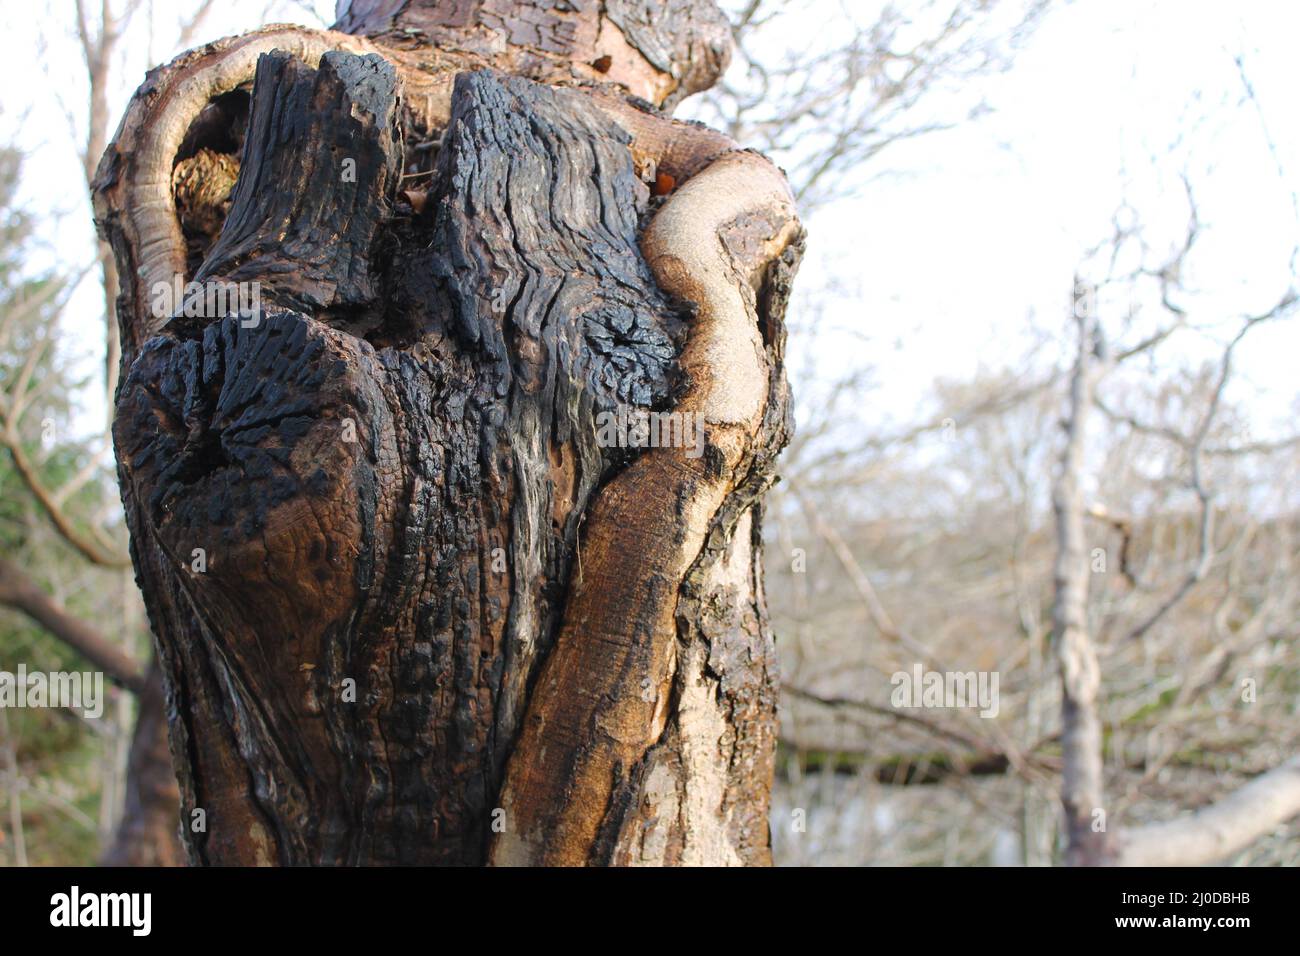 A large knothole in a tree trunk where a new tree has grown around the broken trunk of an older tree. Stock Photo